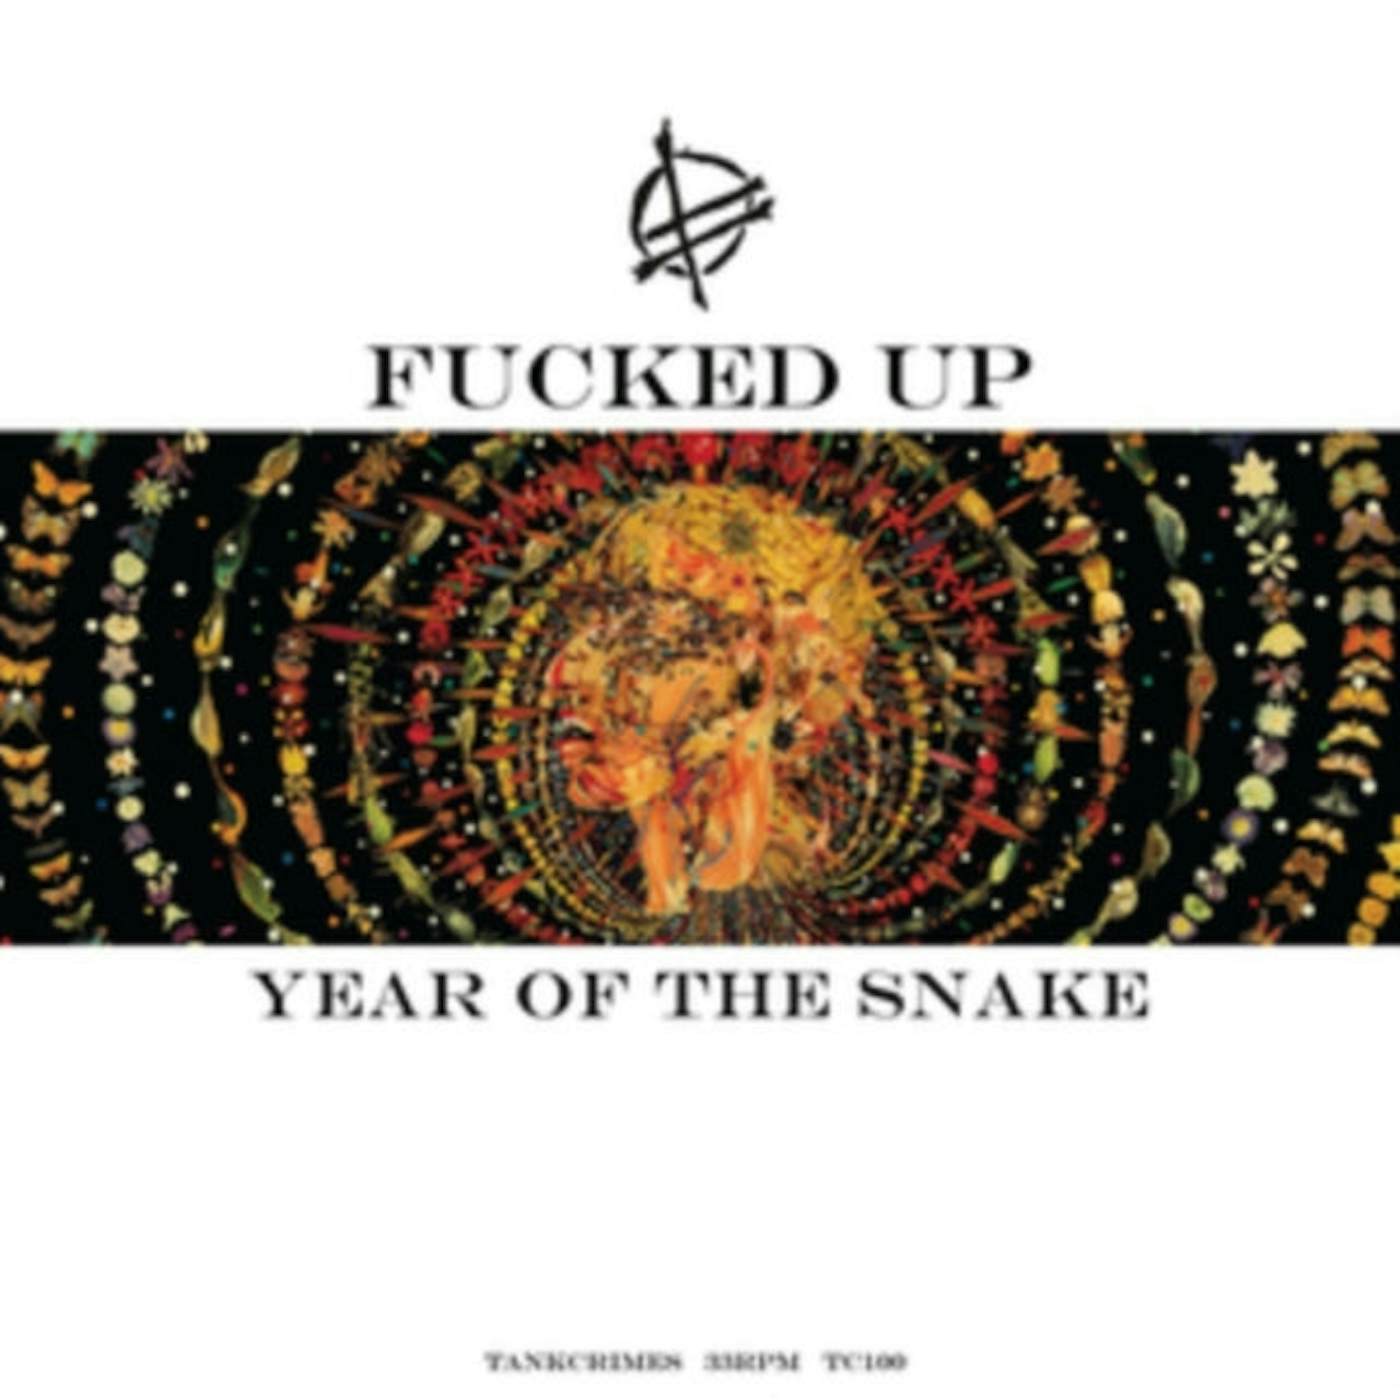 Fucked Up CD - Year Of The Snake